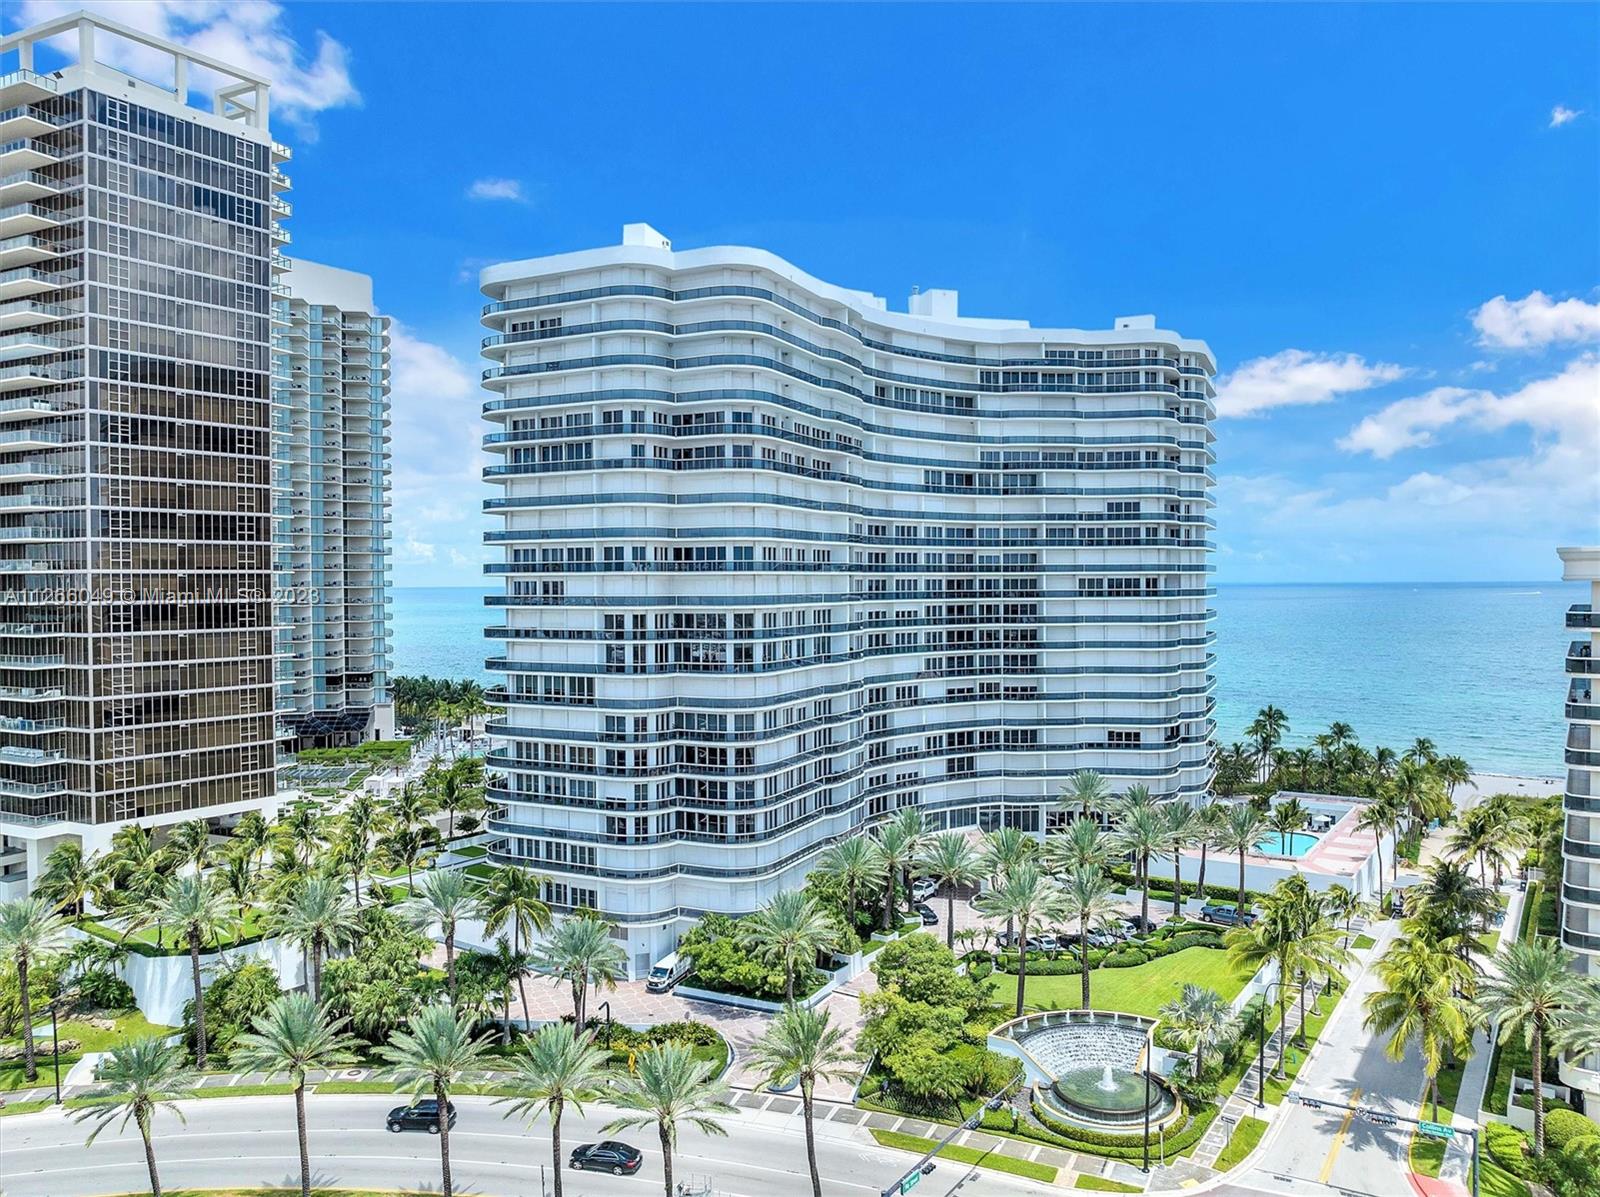 WOW! Private elevator opens to breathtaking 180 degree views from floor to ceiling hurricane  windows and wrap around balcony Ultra luxury oceanfront building located in village of Bal Harbor.Across from the exclusive Bal Harbor shops. Walk to awe- some Heart-stopping excruciating attention to detail in this expansive 3 bed+DEN 3.5 bath masterpi. Feast your eyes on the spectacular open kitchen with marble counters and new Viking appliances. Plus new porcelain floors, standing tub in the spacious master bathroom,custom built closet, motorized shades & hi-tech washer dryer. Highly amenitized complex with full service concierge, valet, security, gym/spa, restaurant & tennis club++--
special assesment for renovation has been fully paid